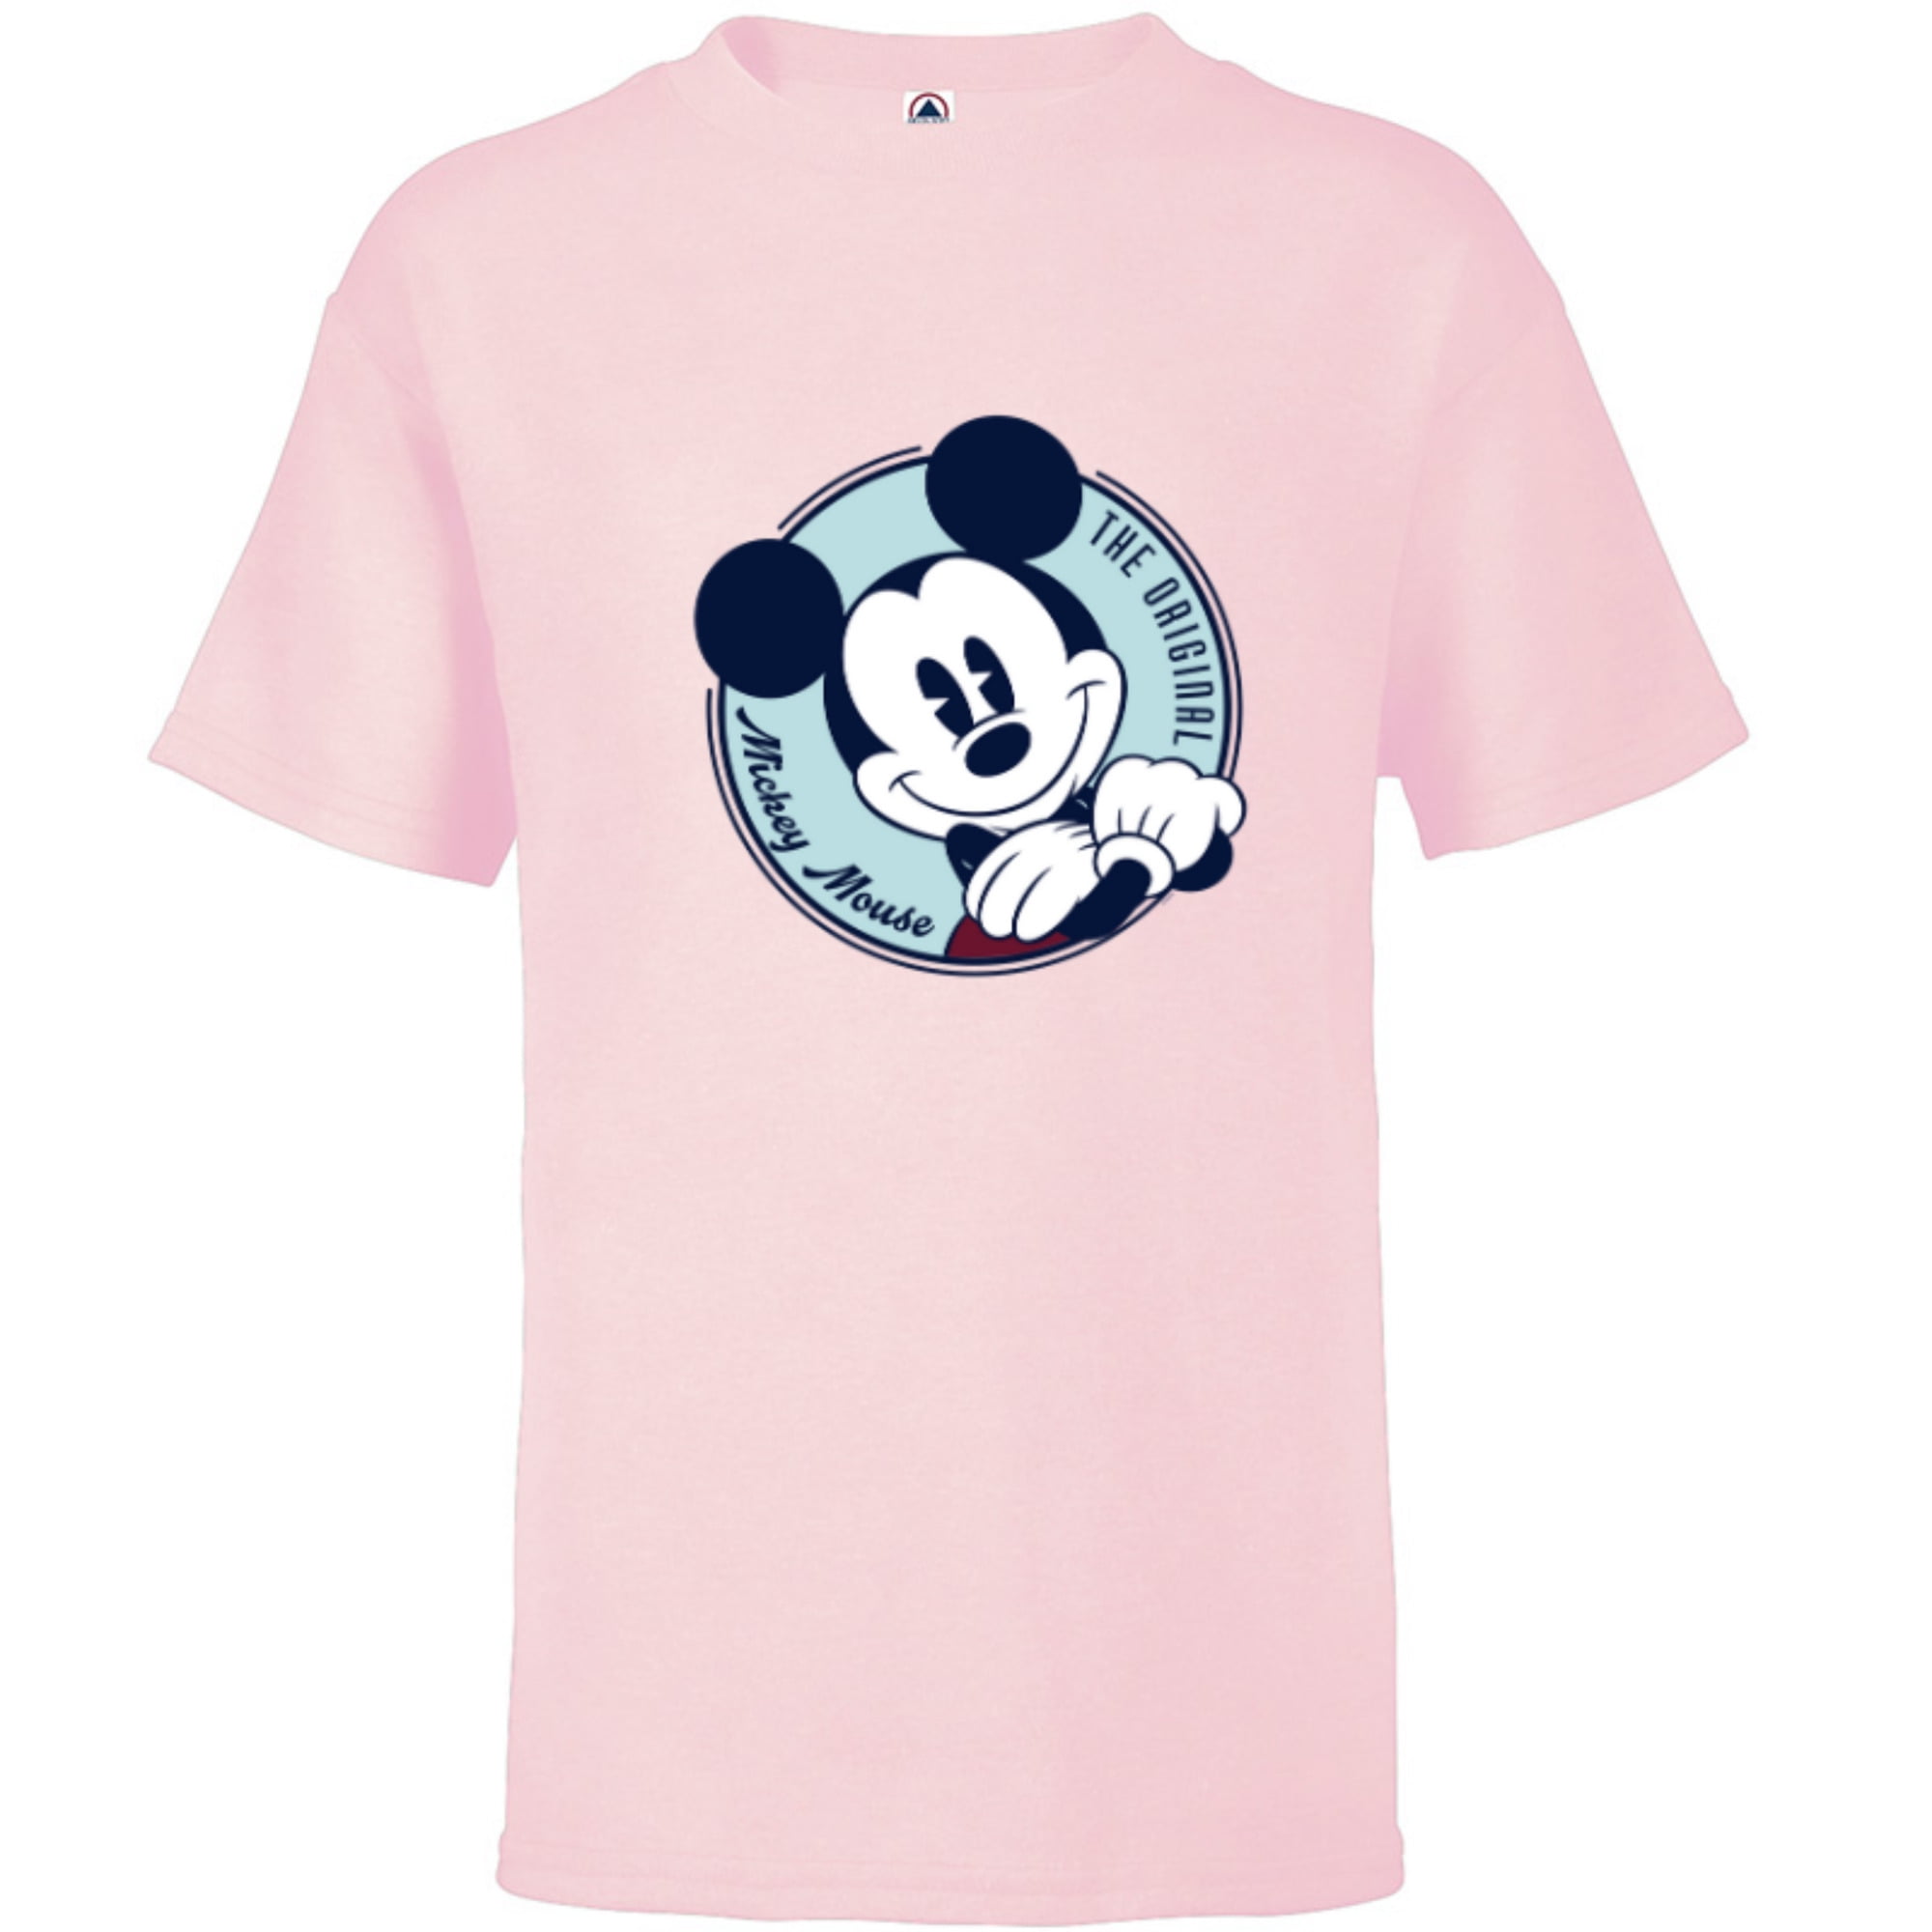 Disney The Original Retro for - - Vintage Sleeve Short Kids Customized-Soft Pink Mouse Mickey T-Shirt